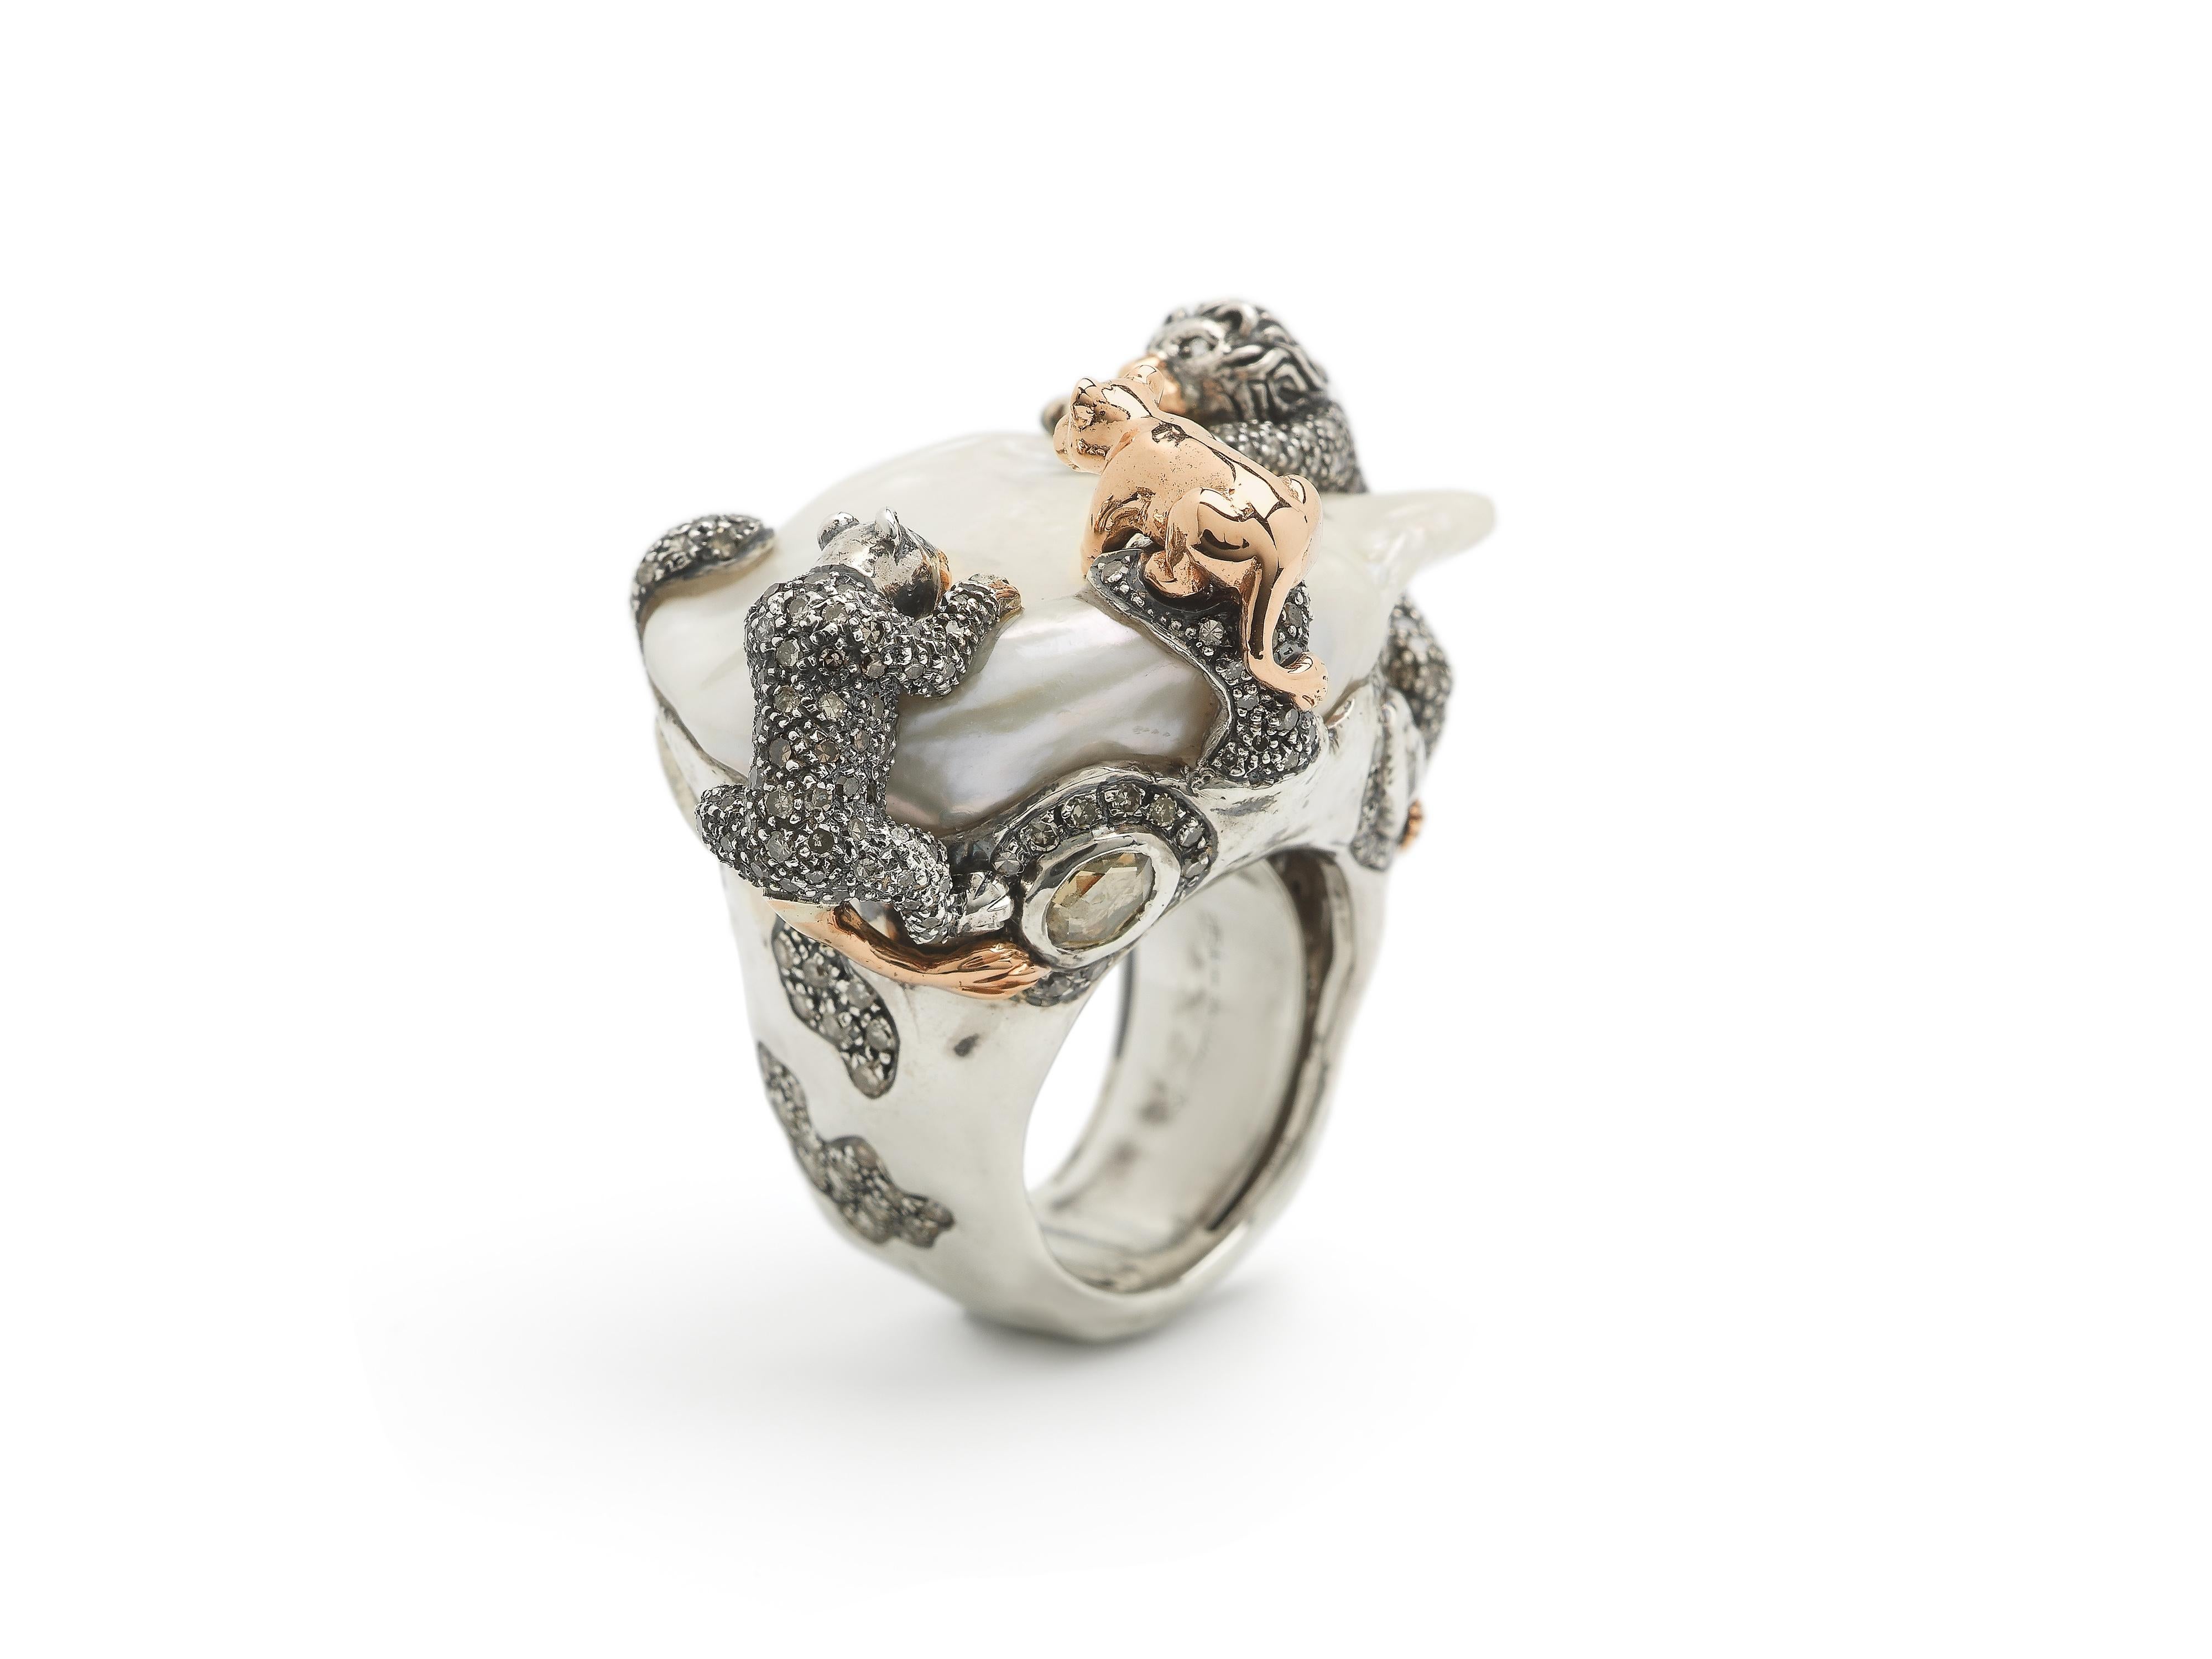 A luminous baroque pearl is home to a family of lions in this striking cocktail ring, part of Bibi van der Velden’s Animal Collection. The sterling silver ring is set with three lions fashioned in 18k rose gold and sterling silver, with the design